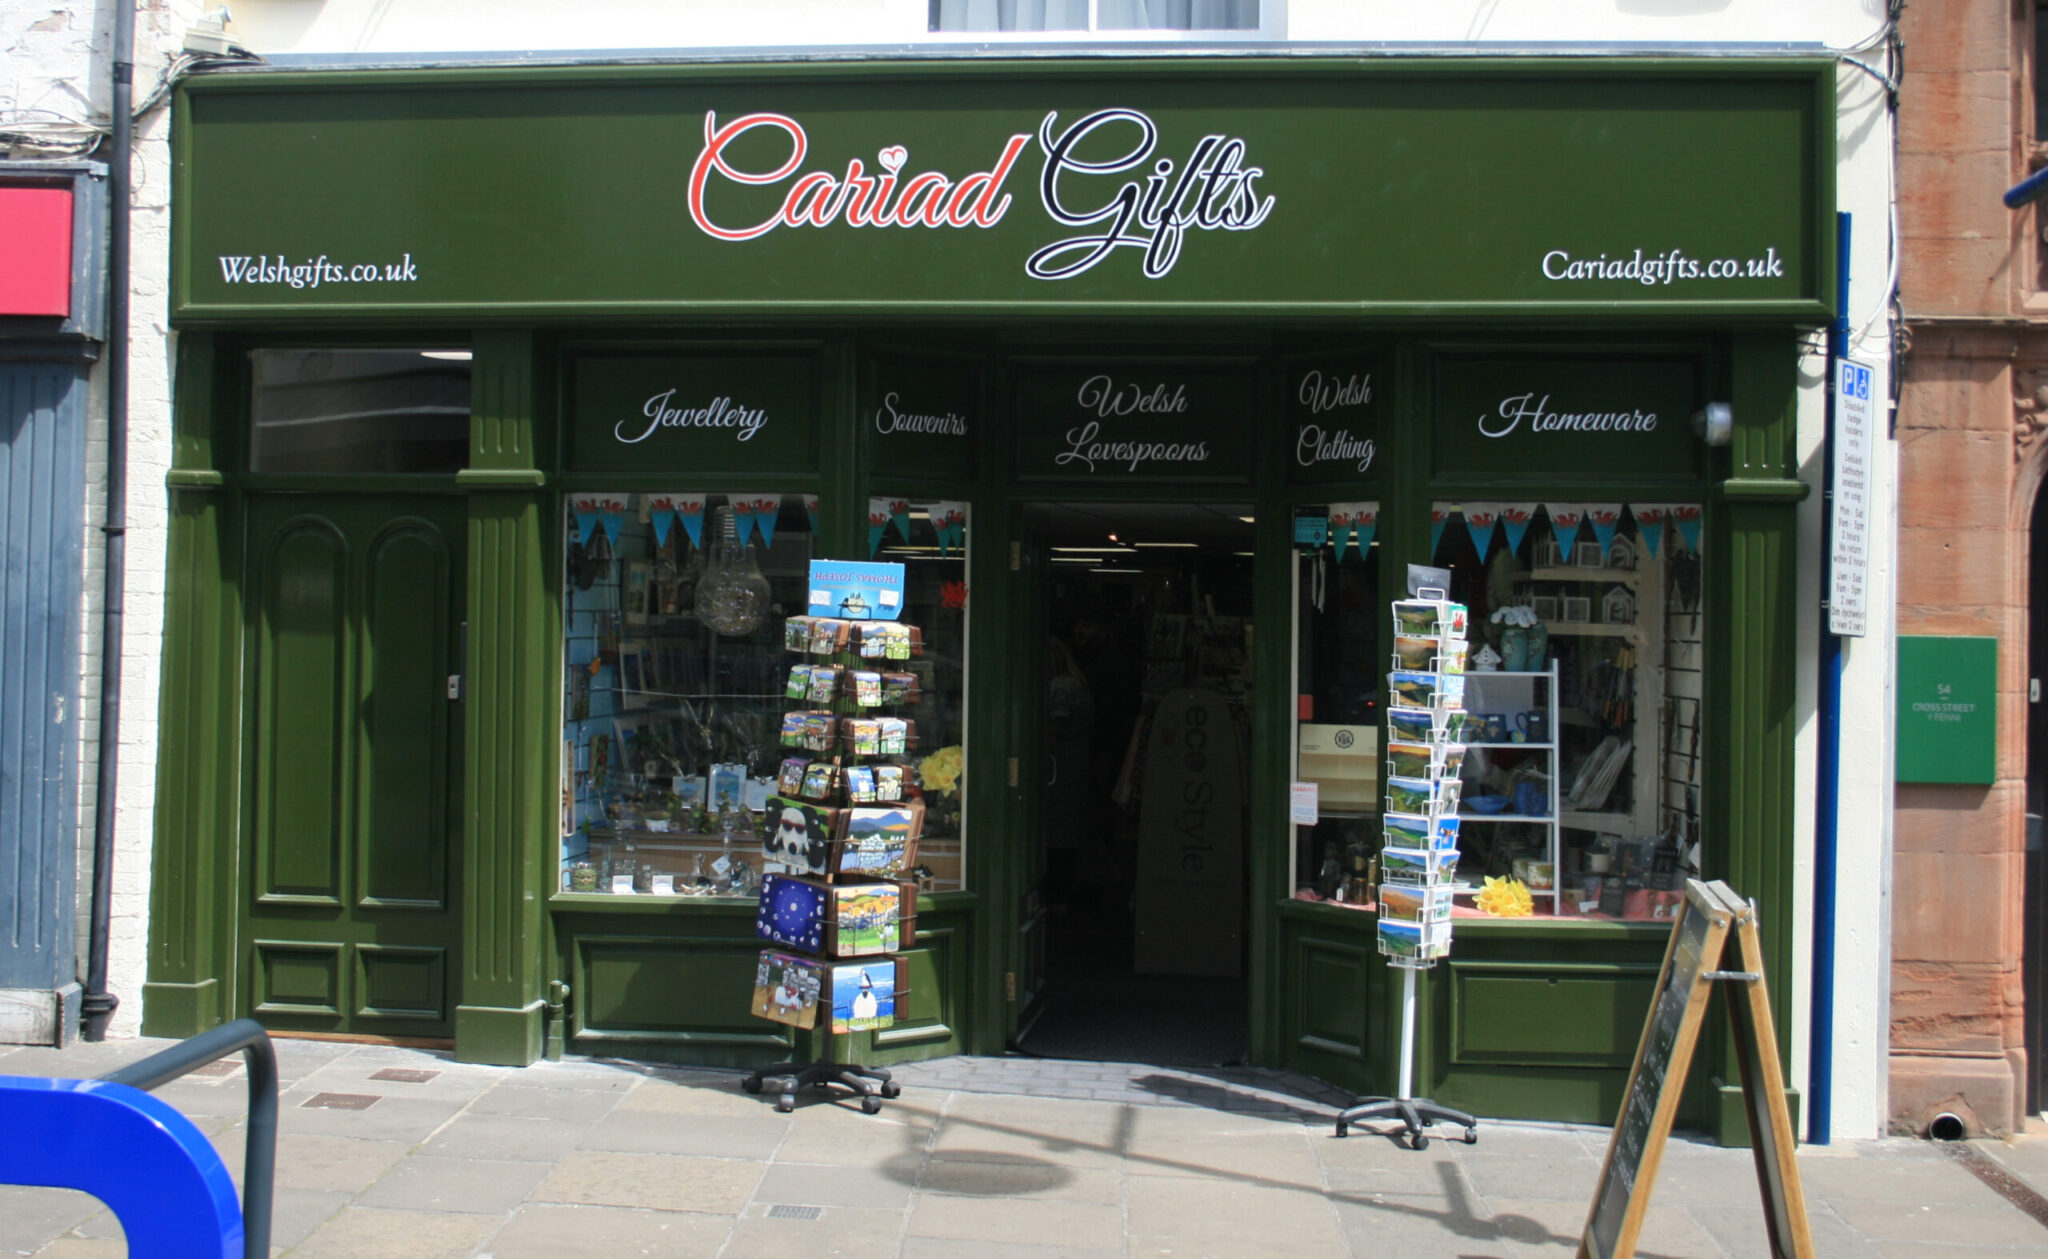 An image showing the shopfront in Abergavenny, Wales.